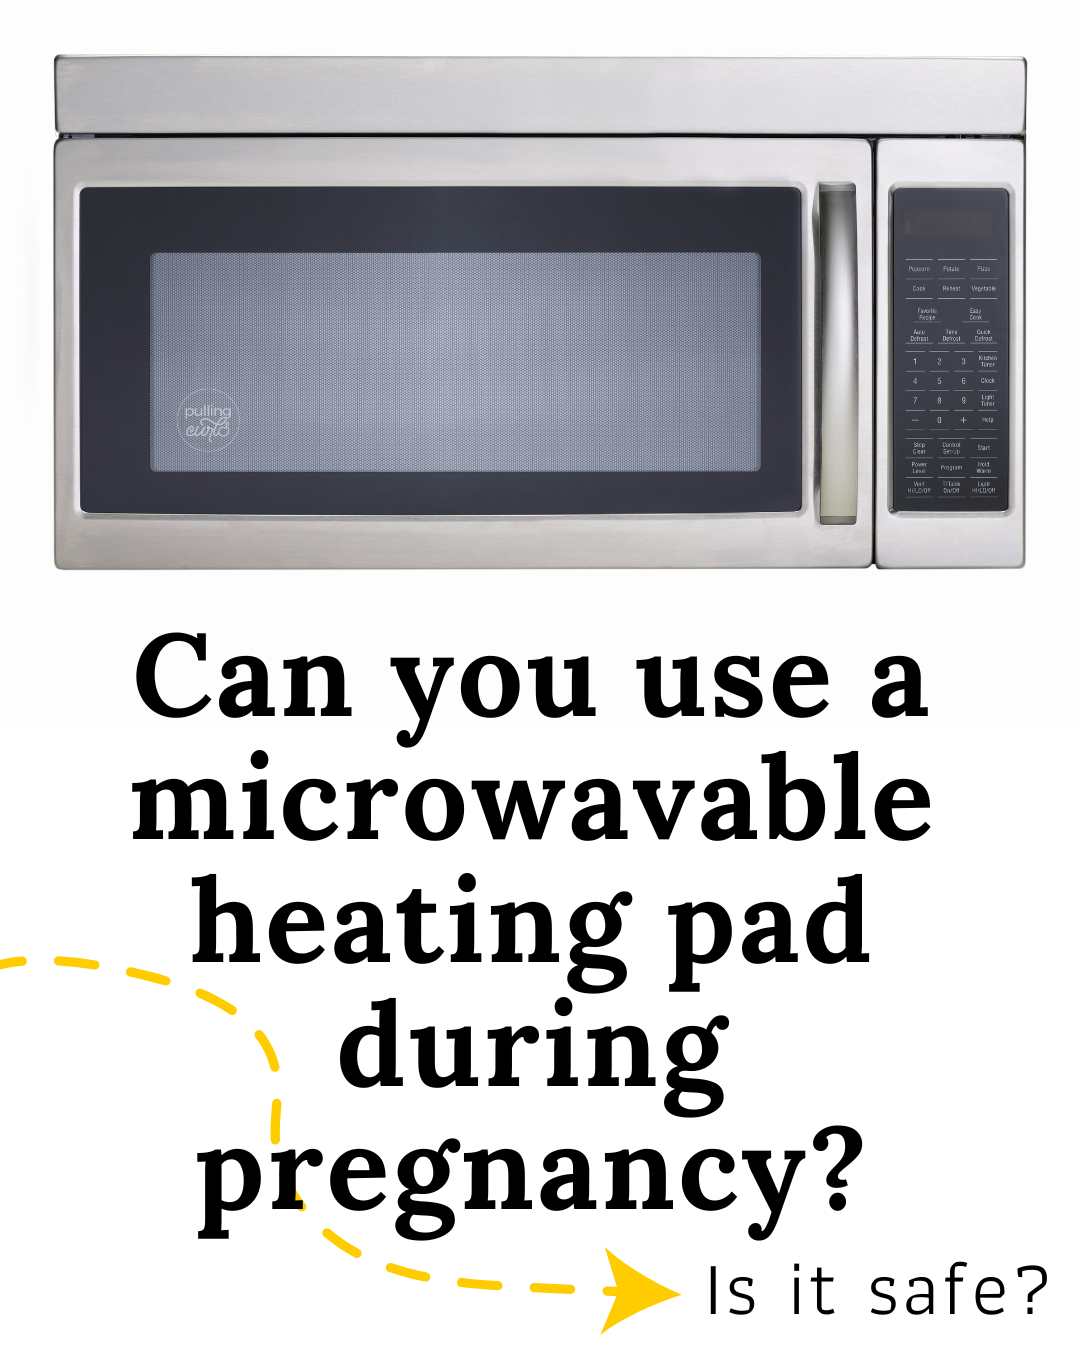 microwave / can you use a microwavable heating pad during pregnancy -- is it safe? via @pullingcurls